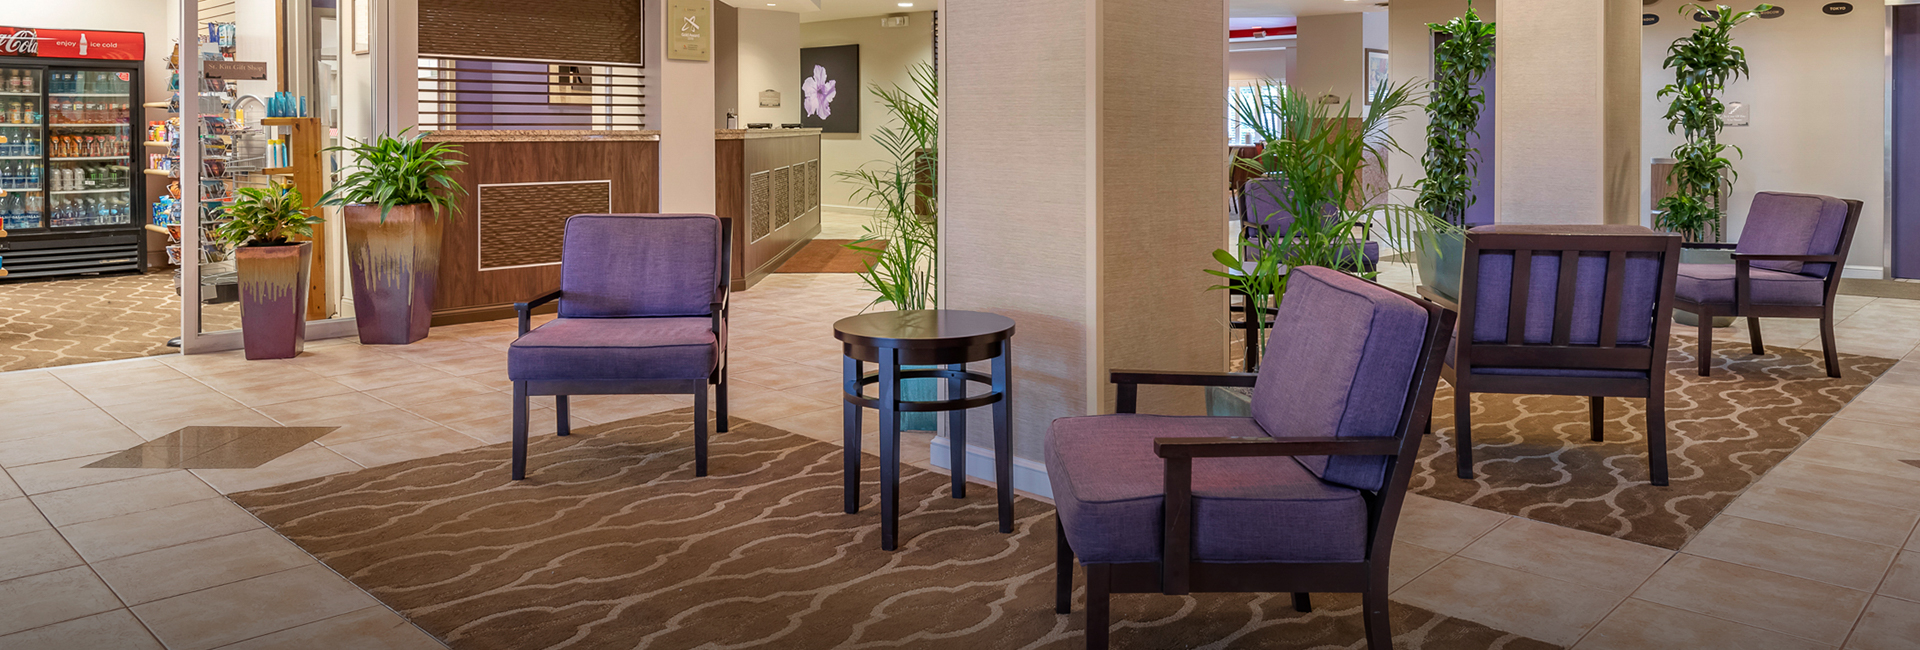 lobby of comfort suites with purple chairs